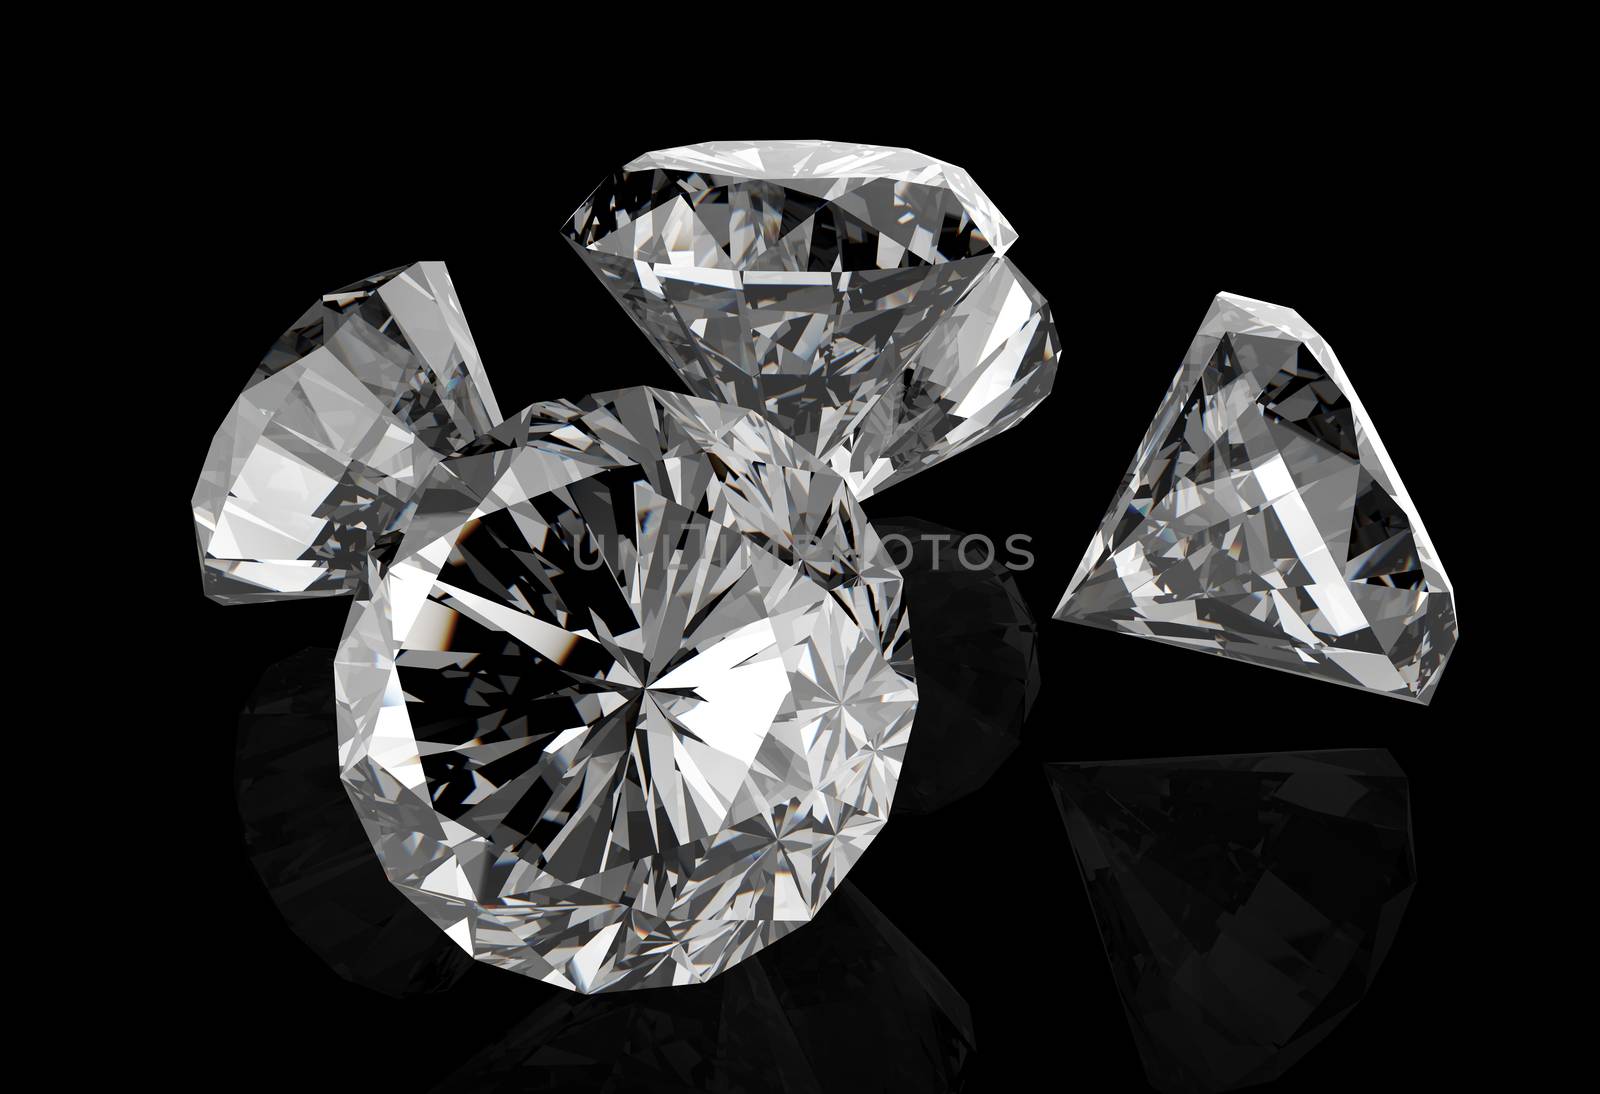 diamonds on black surface by everythingpossible